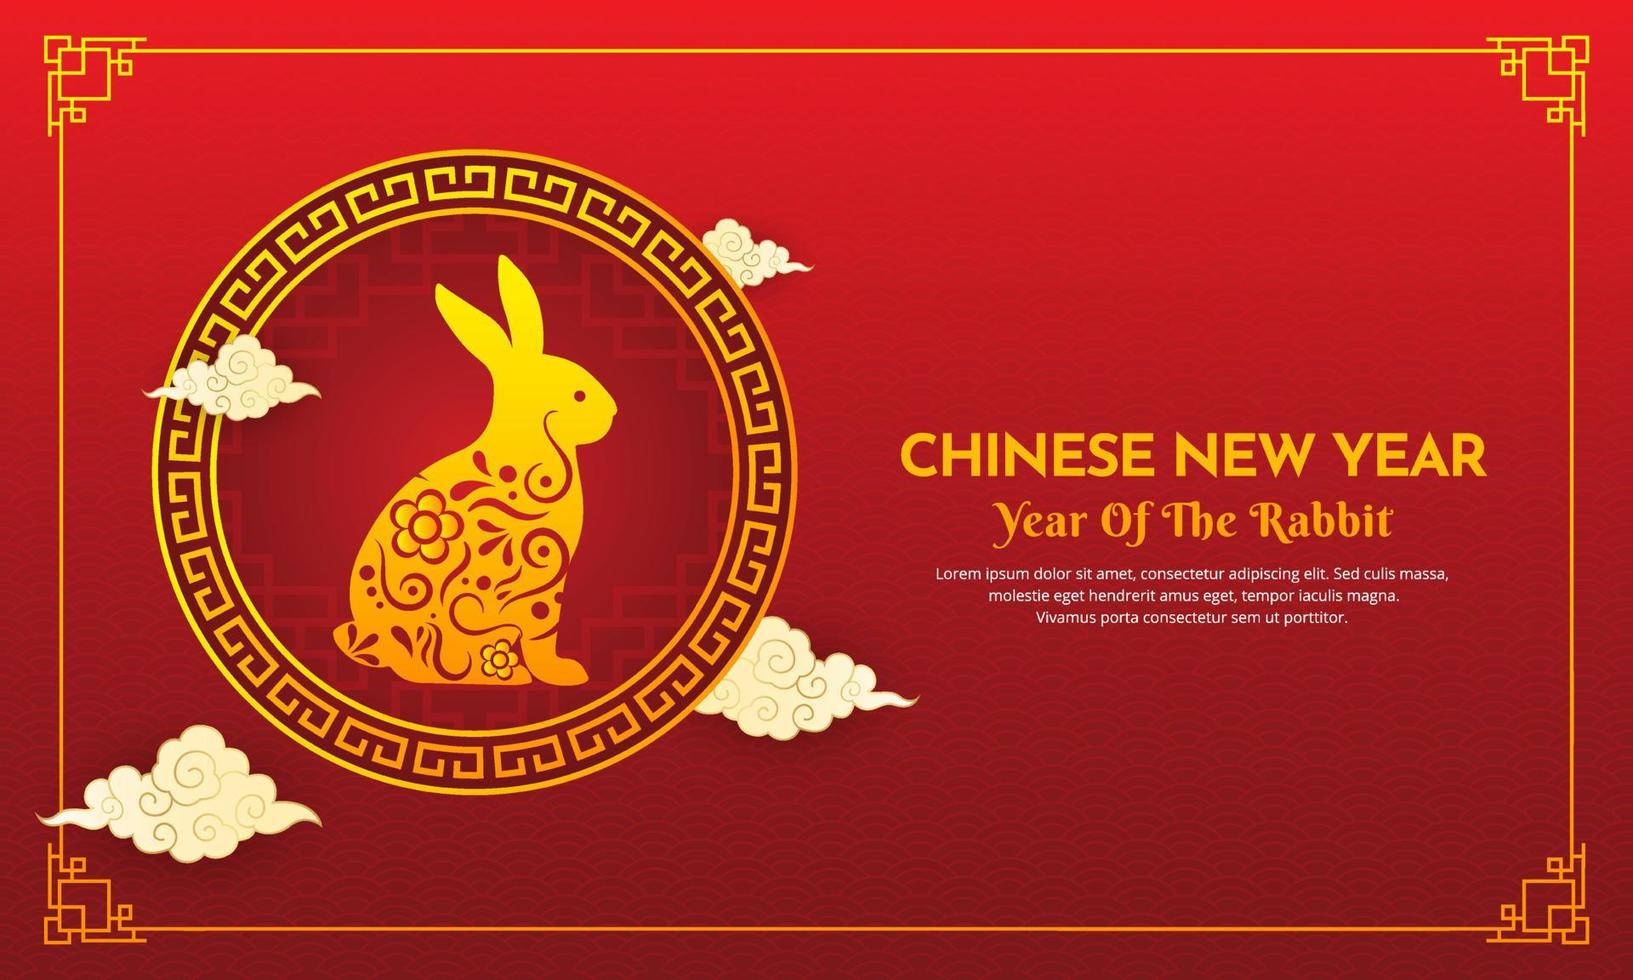 celebration of chinese new year design banner . Year of the rabbit design vector